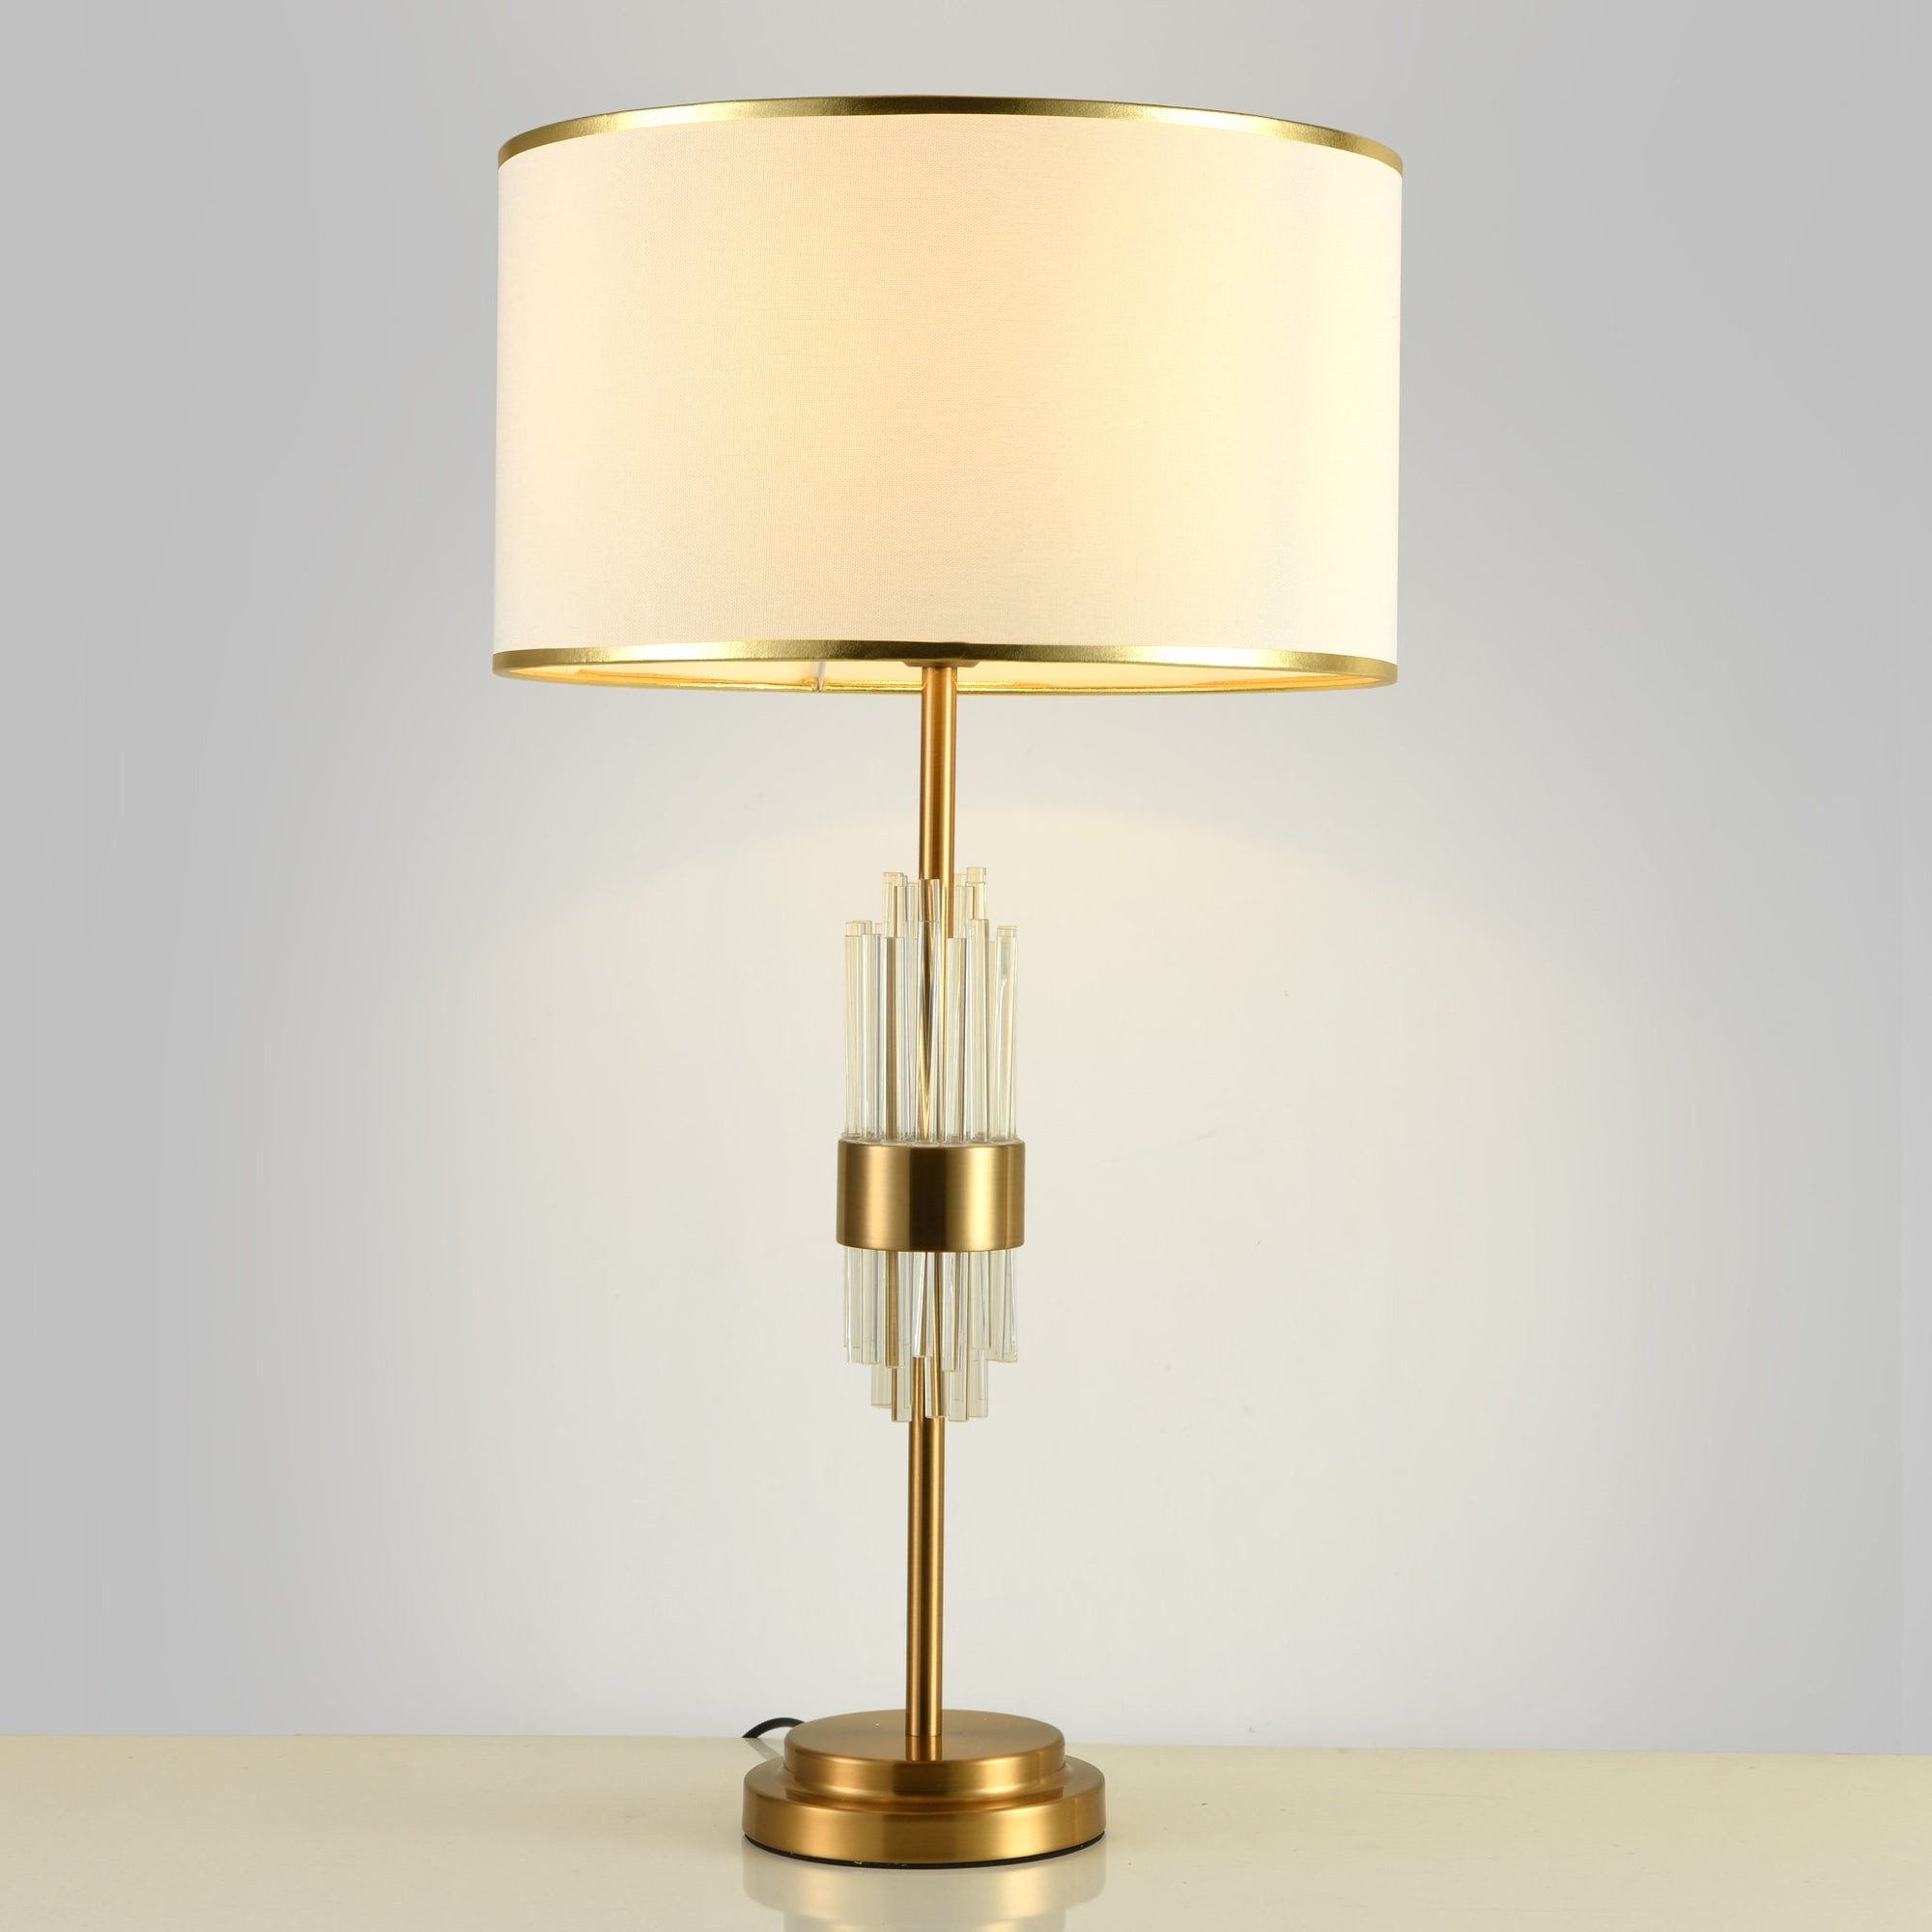 Buy Never Mind Table Lamp Online